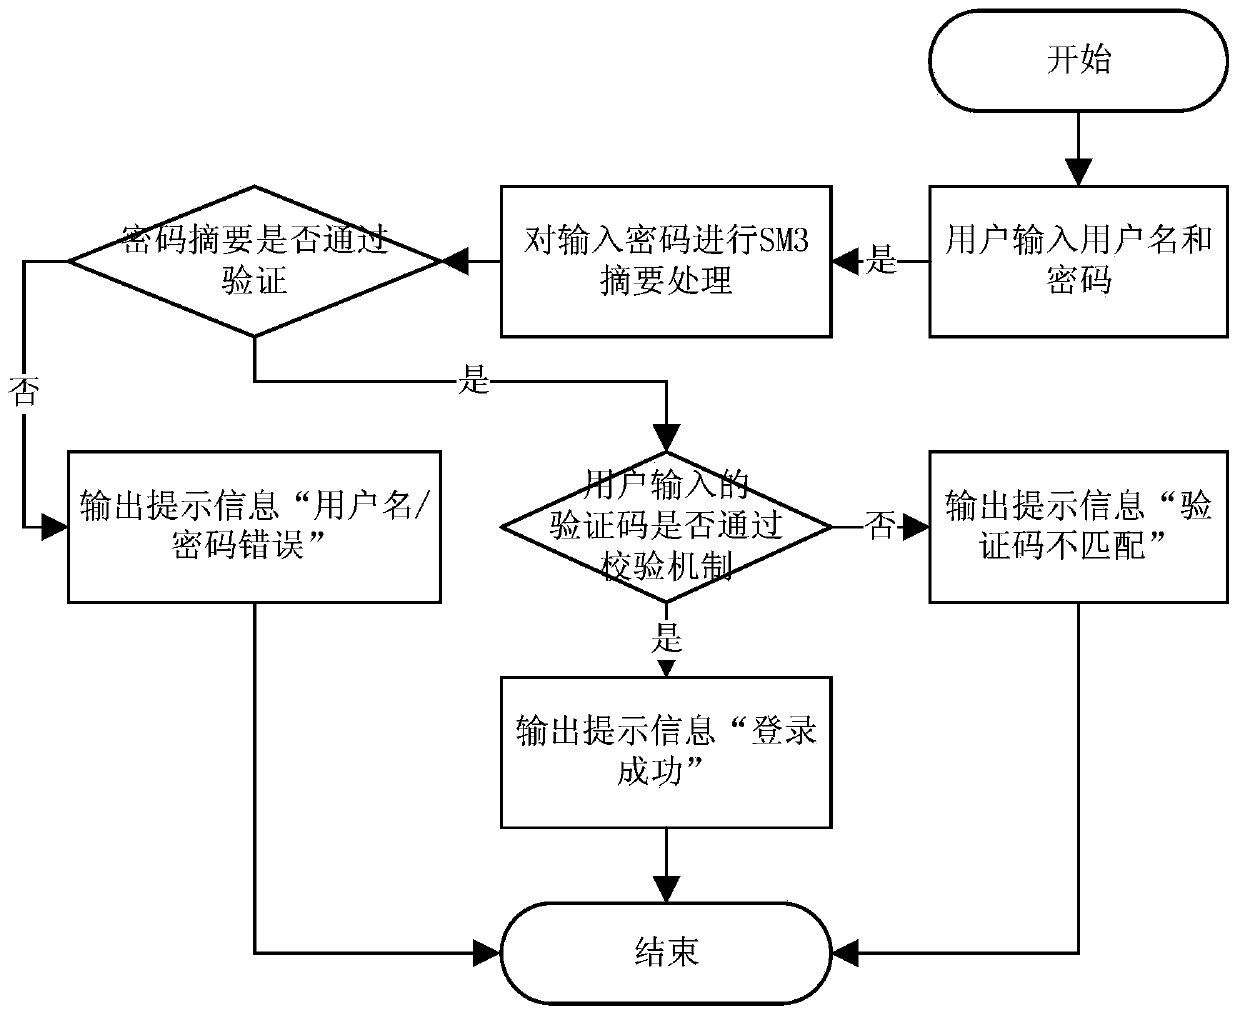 Software copyright management and control system and method based on block chain